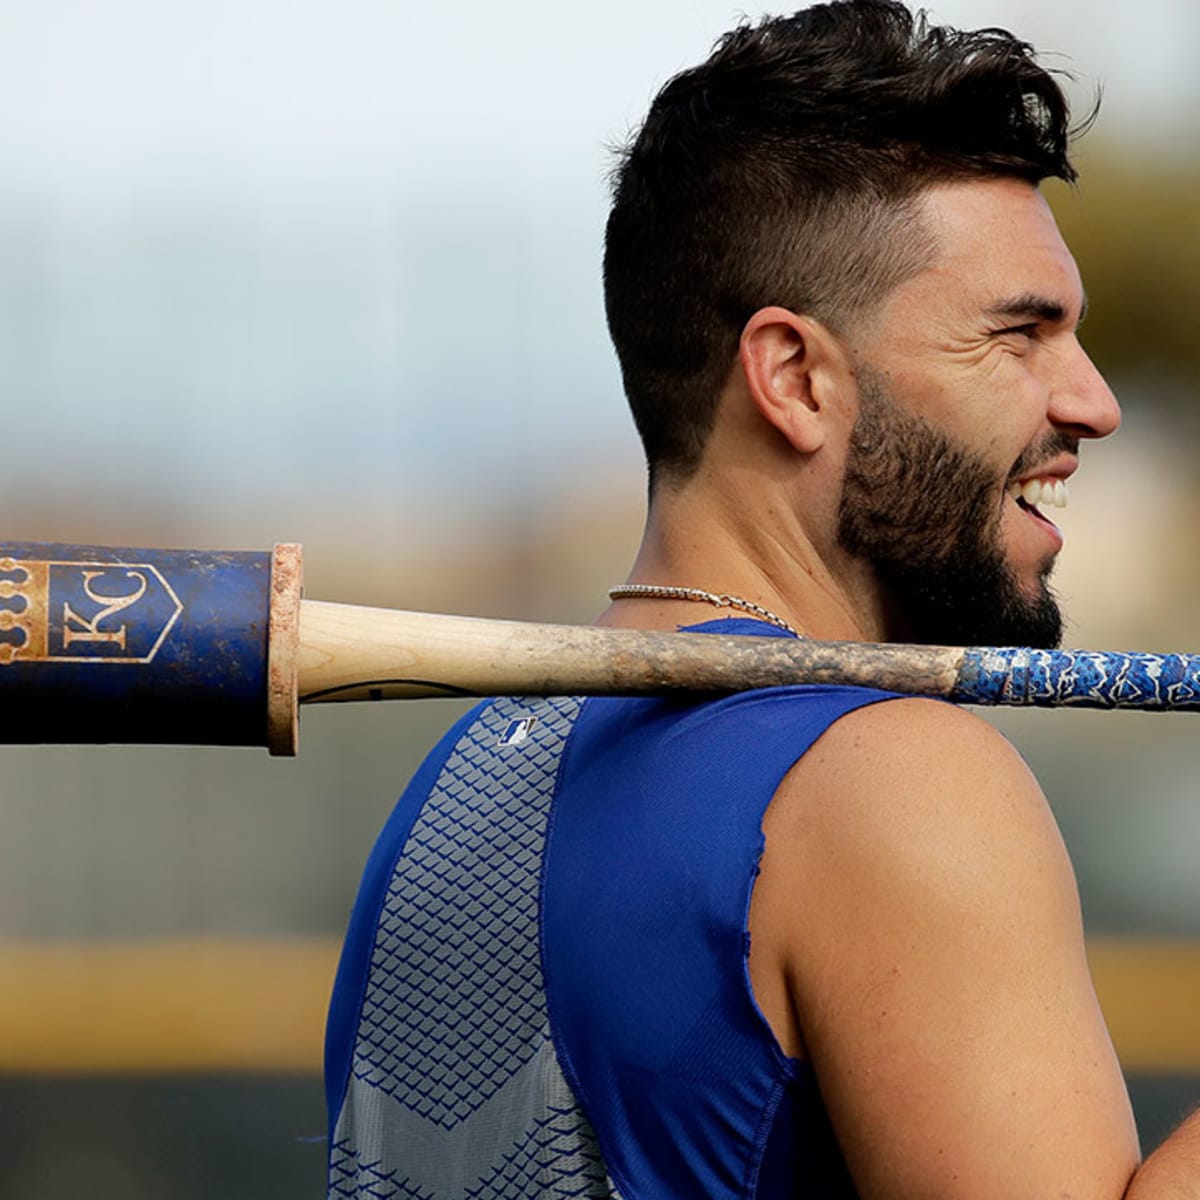 Eric Hosmer has found a special way to honor Yordano Ventura with the Padres